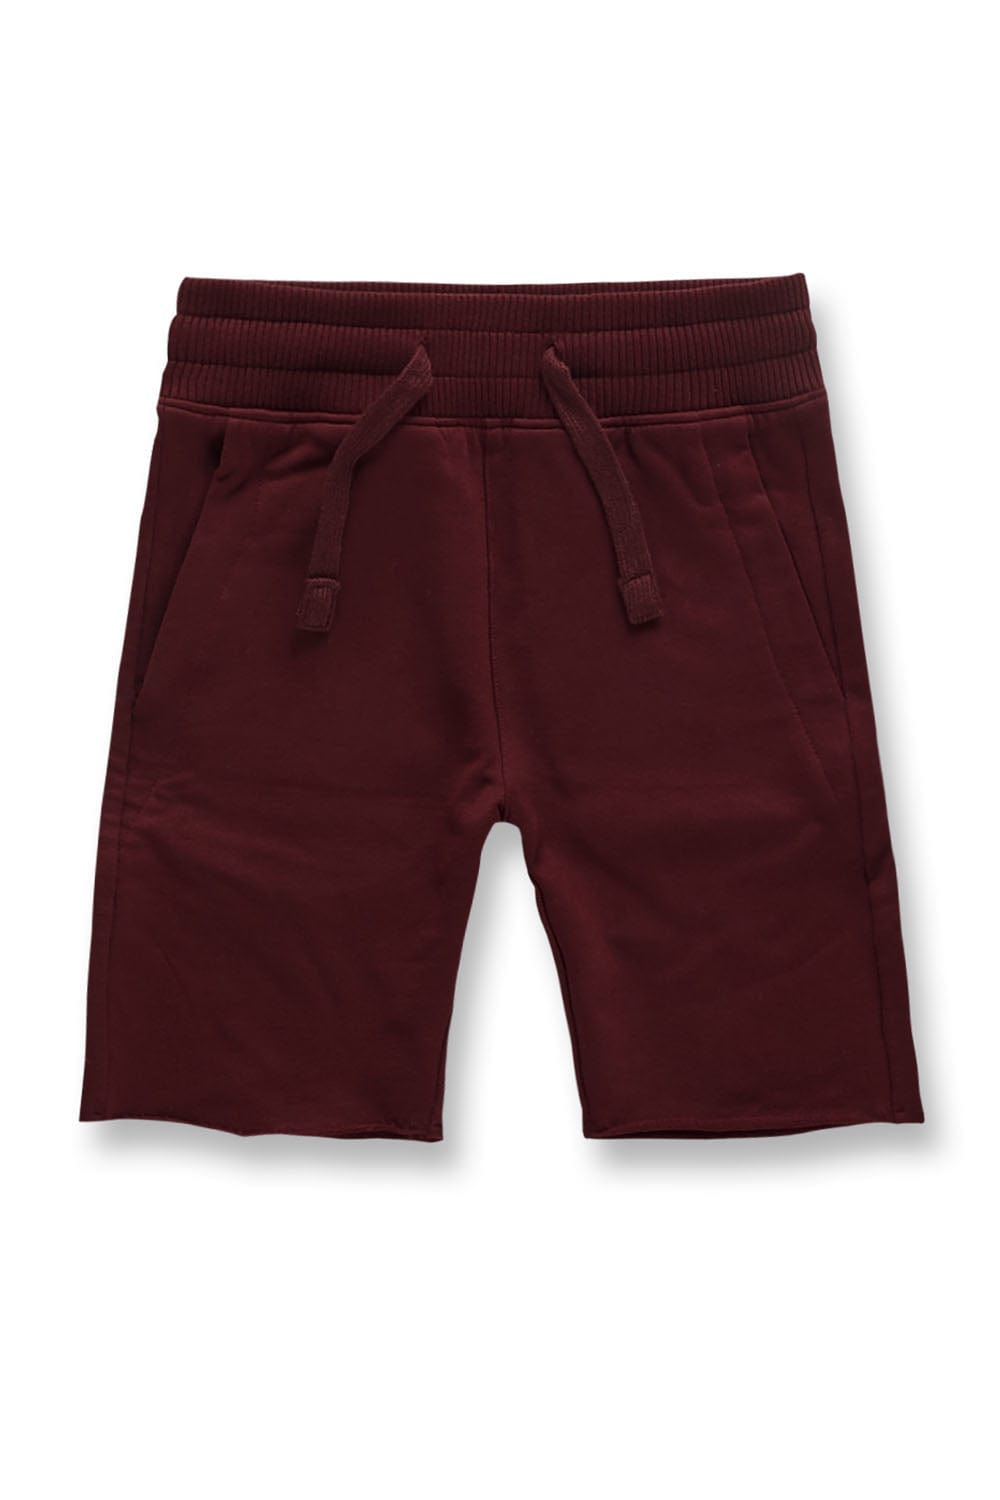 JC Kids Kids Palma French Terry Shorts (Exclusive Colors) Wine / 2